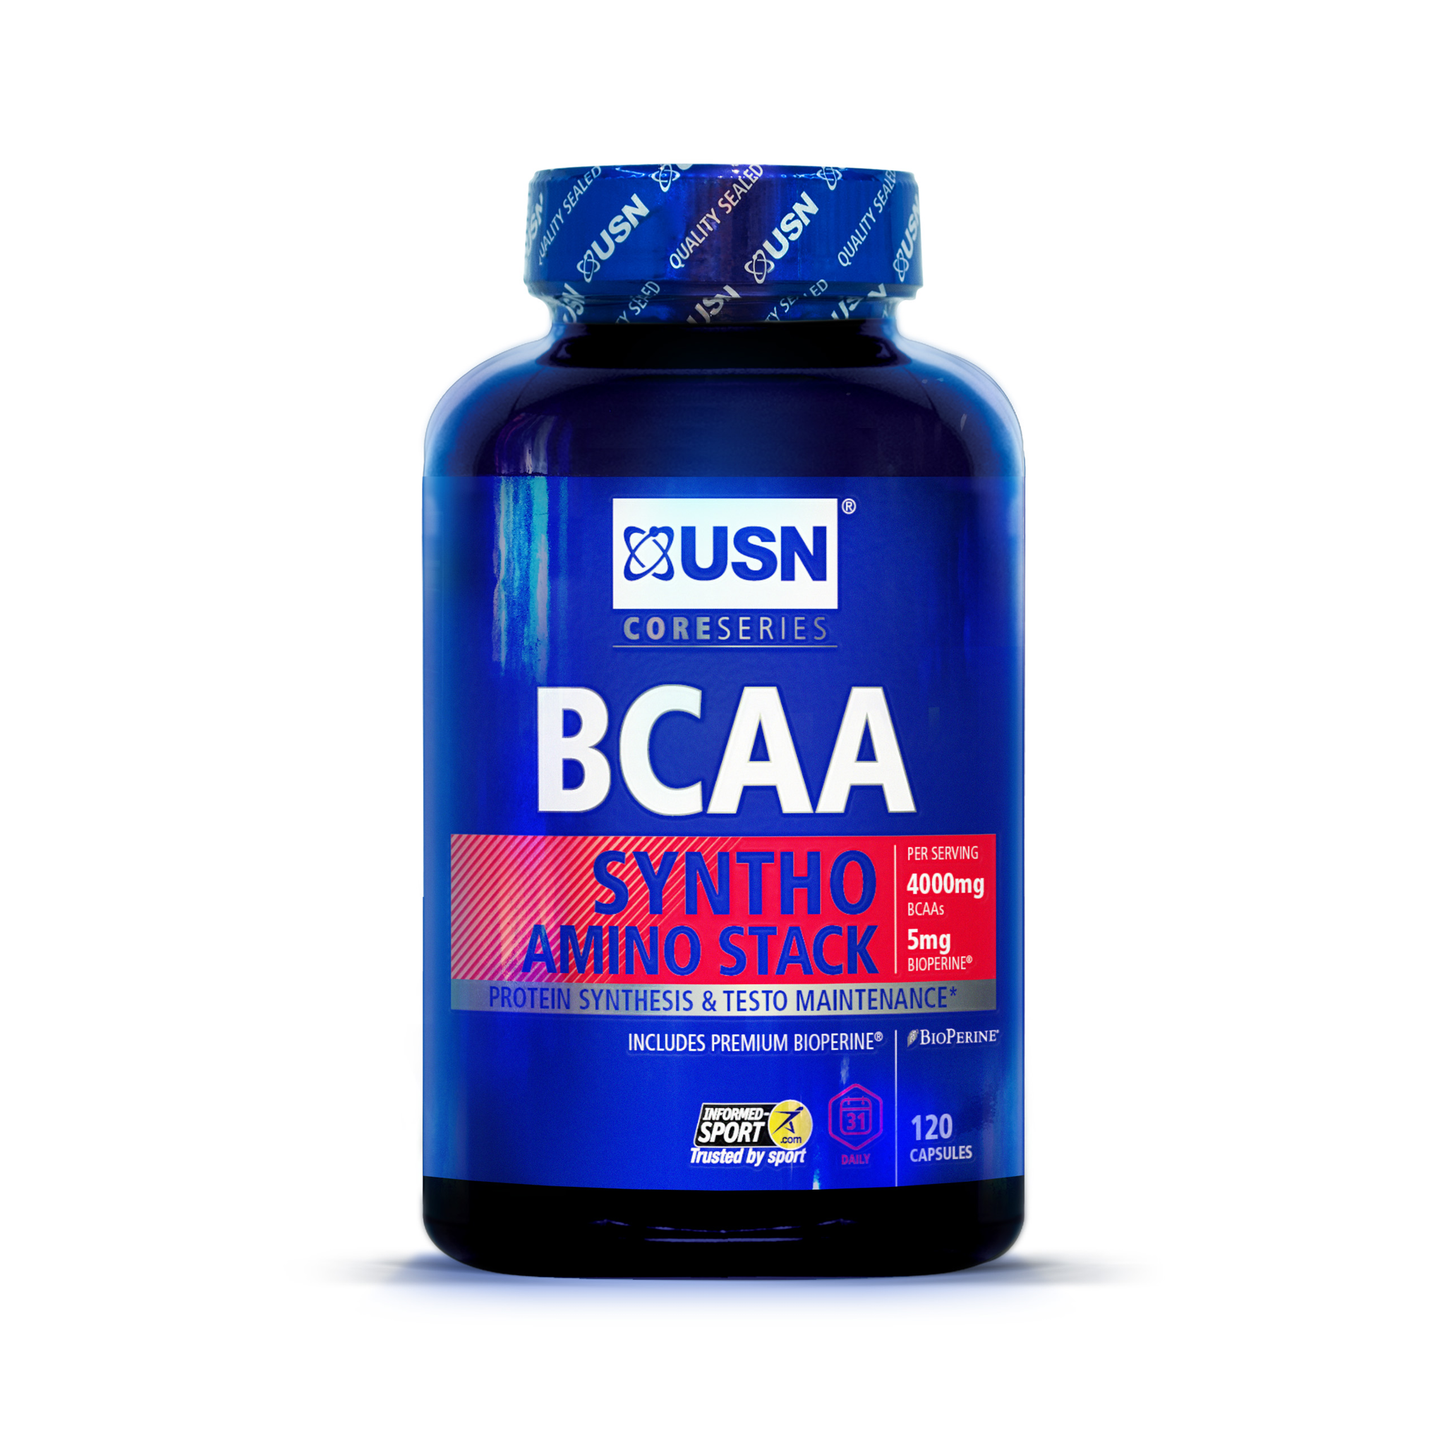 BCAA Syntho Stack